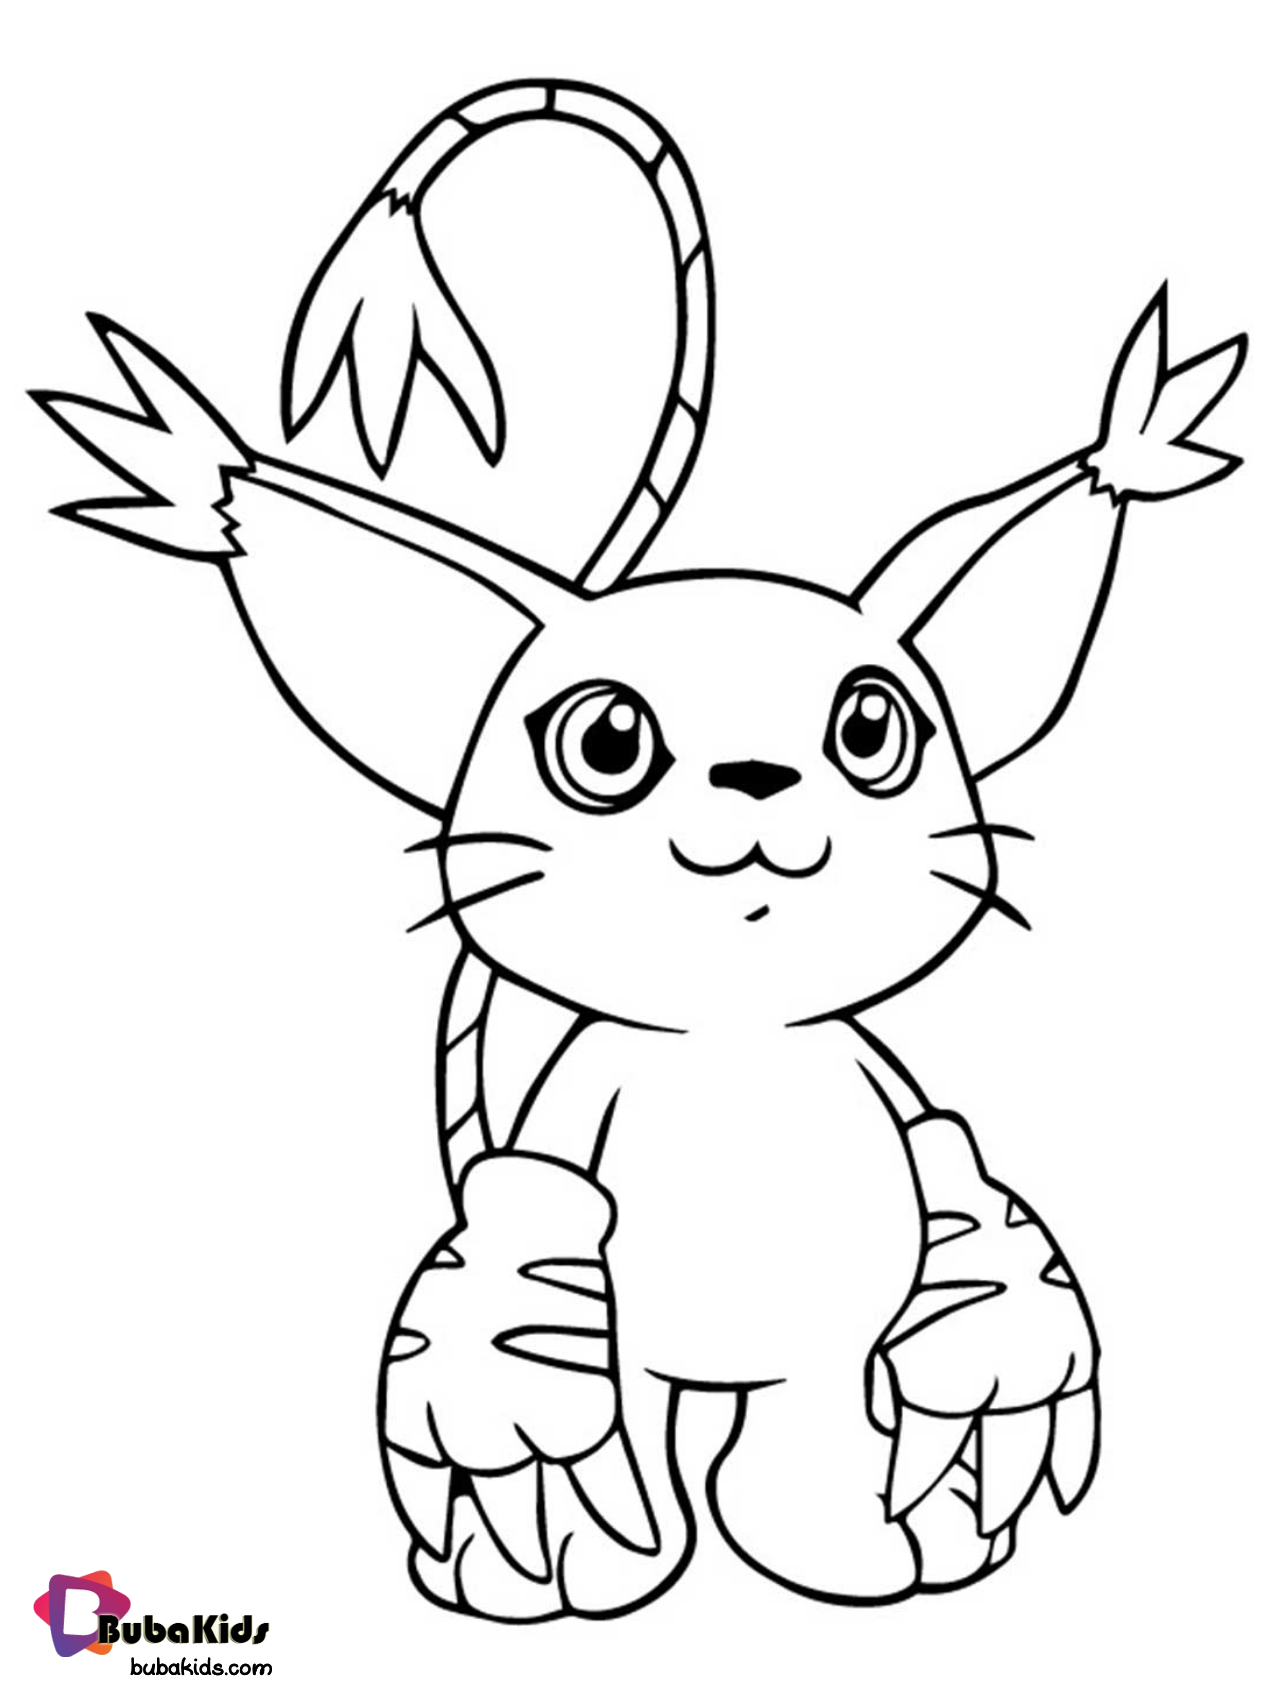 Free Digimon Coloring Pages. Wallpaper